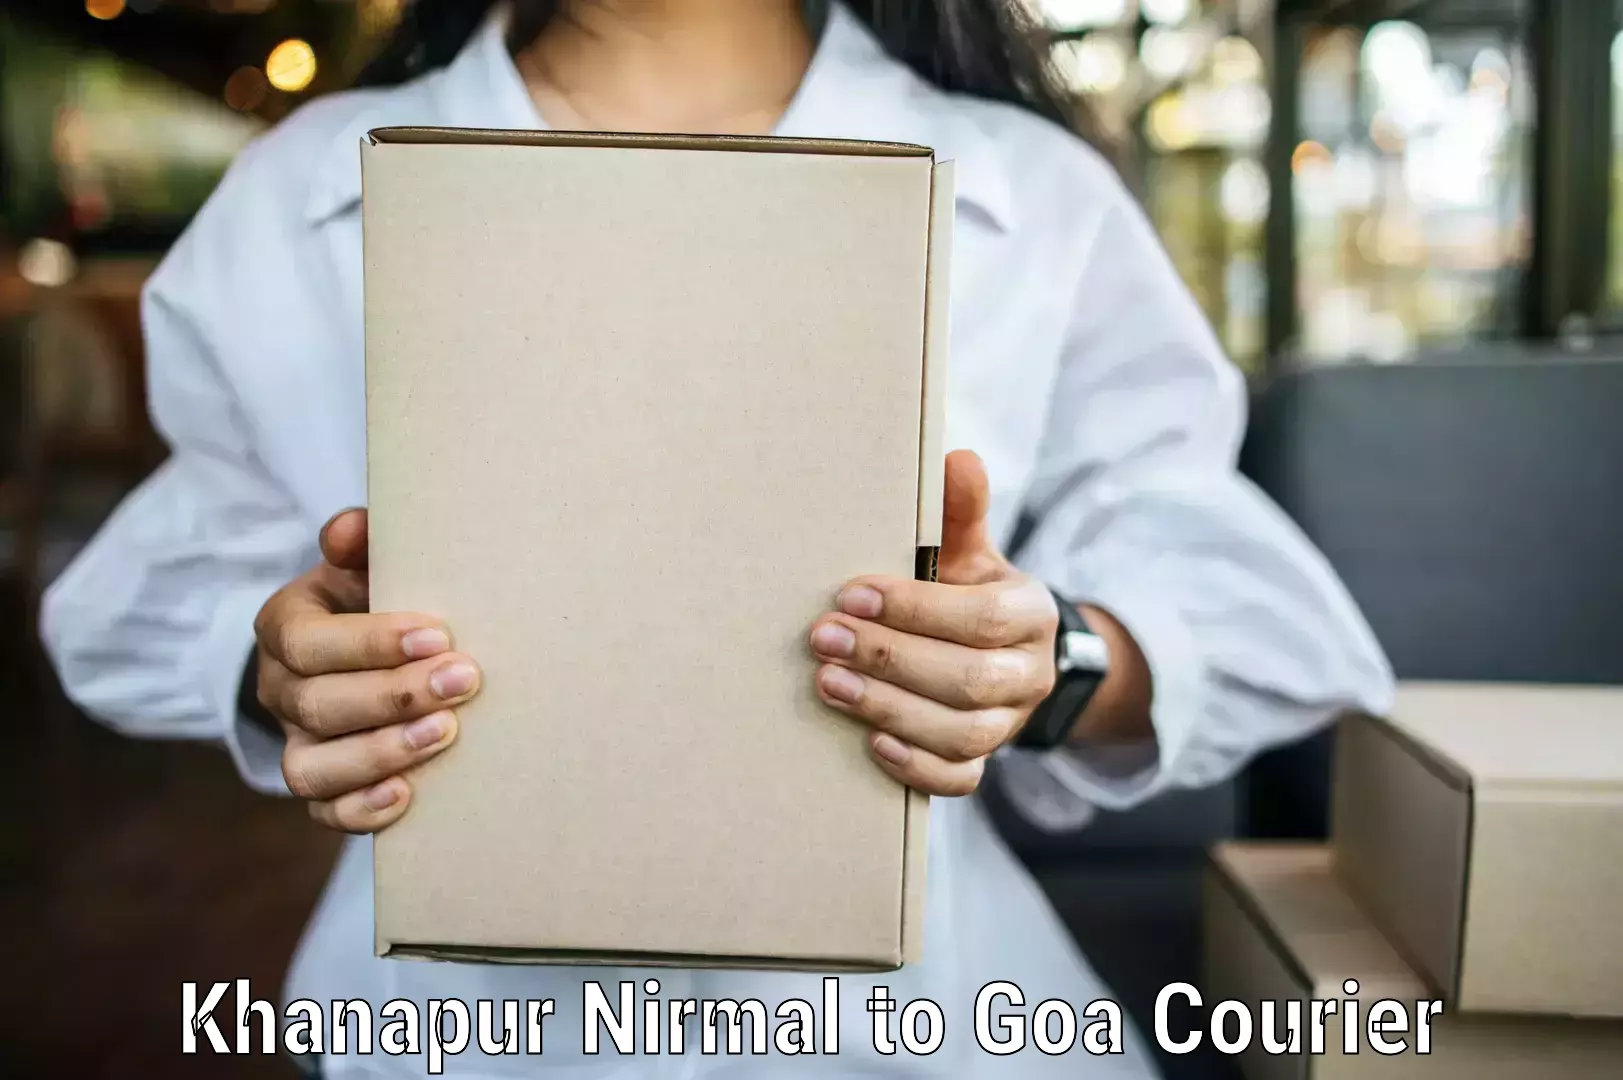 High-quality delivery services Khanapur Nirmal to Goa